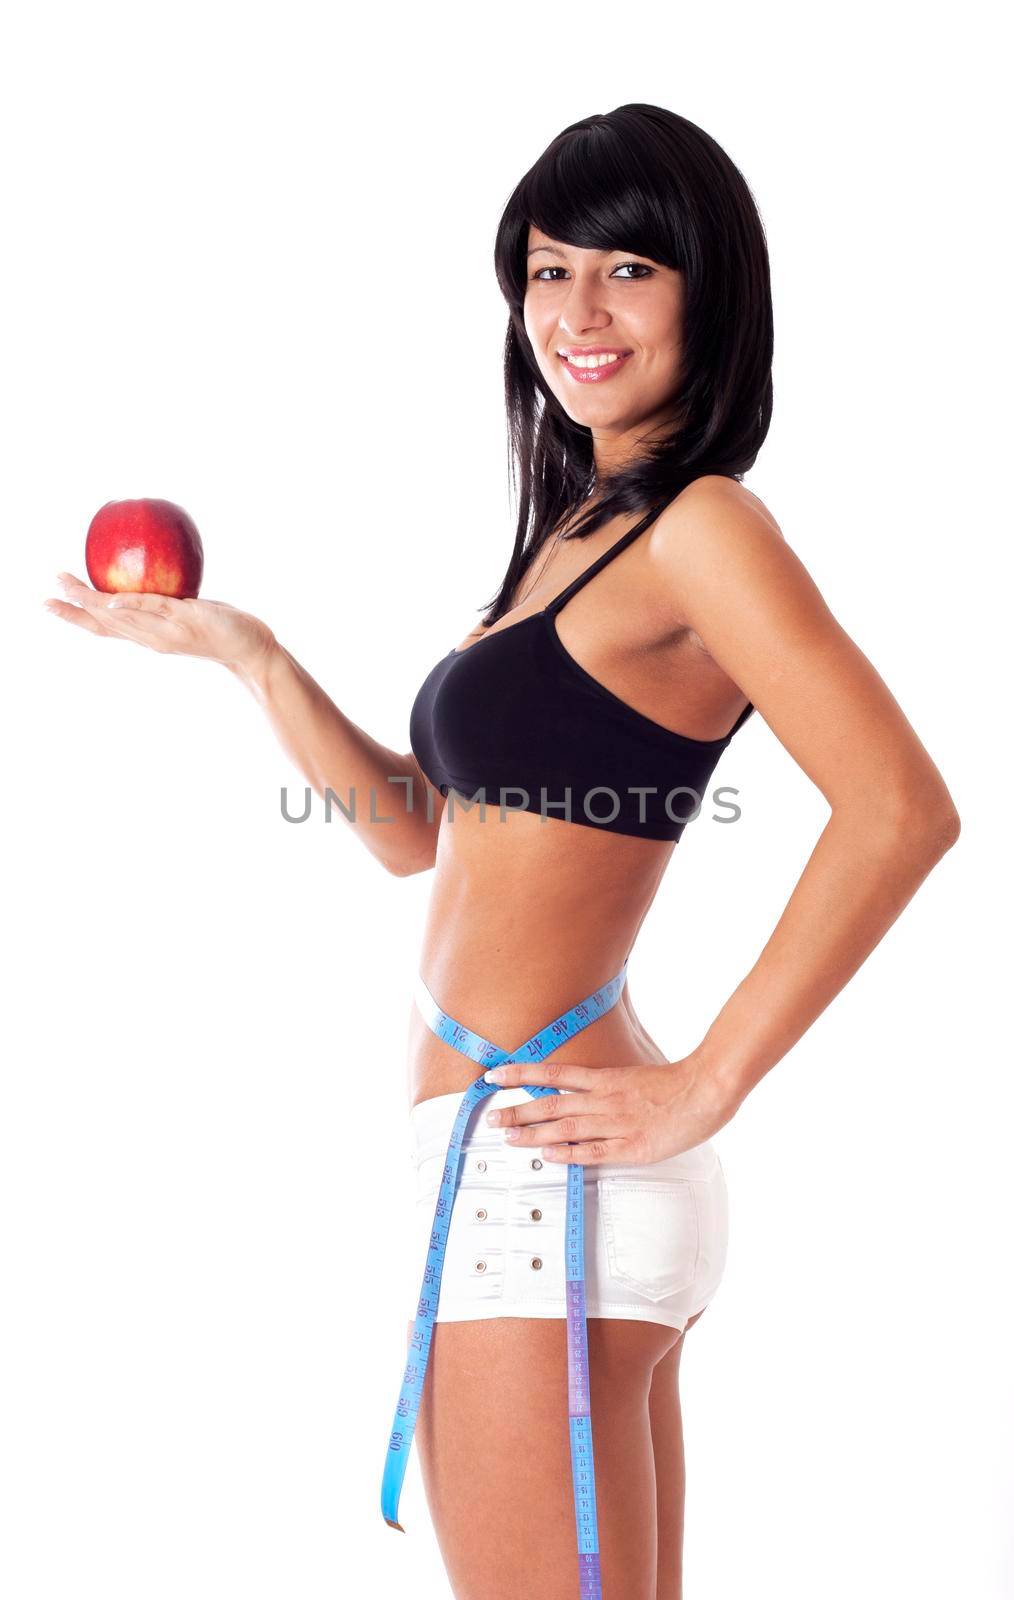 Pretty brunette girl holding apple and showing with a measuring tape around her waist how much centimeters she has already lost. Isolated on white.